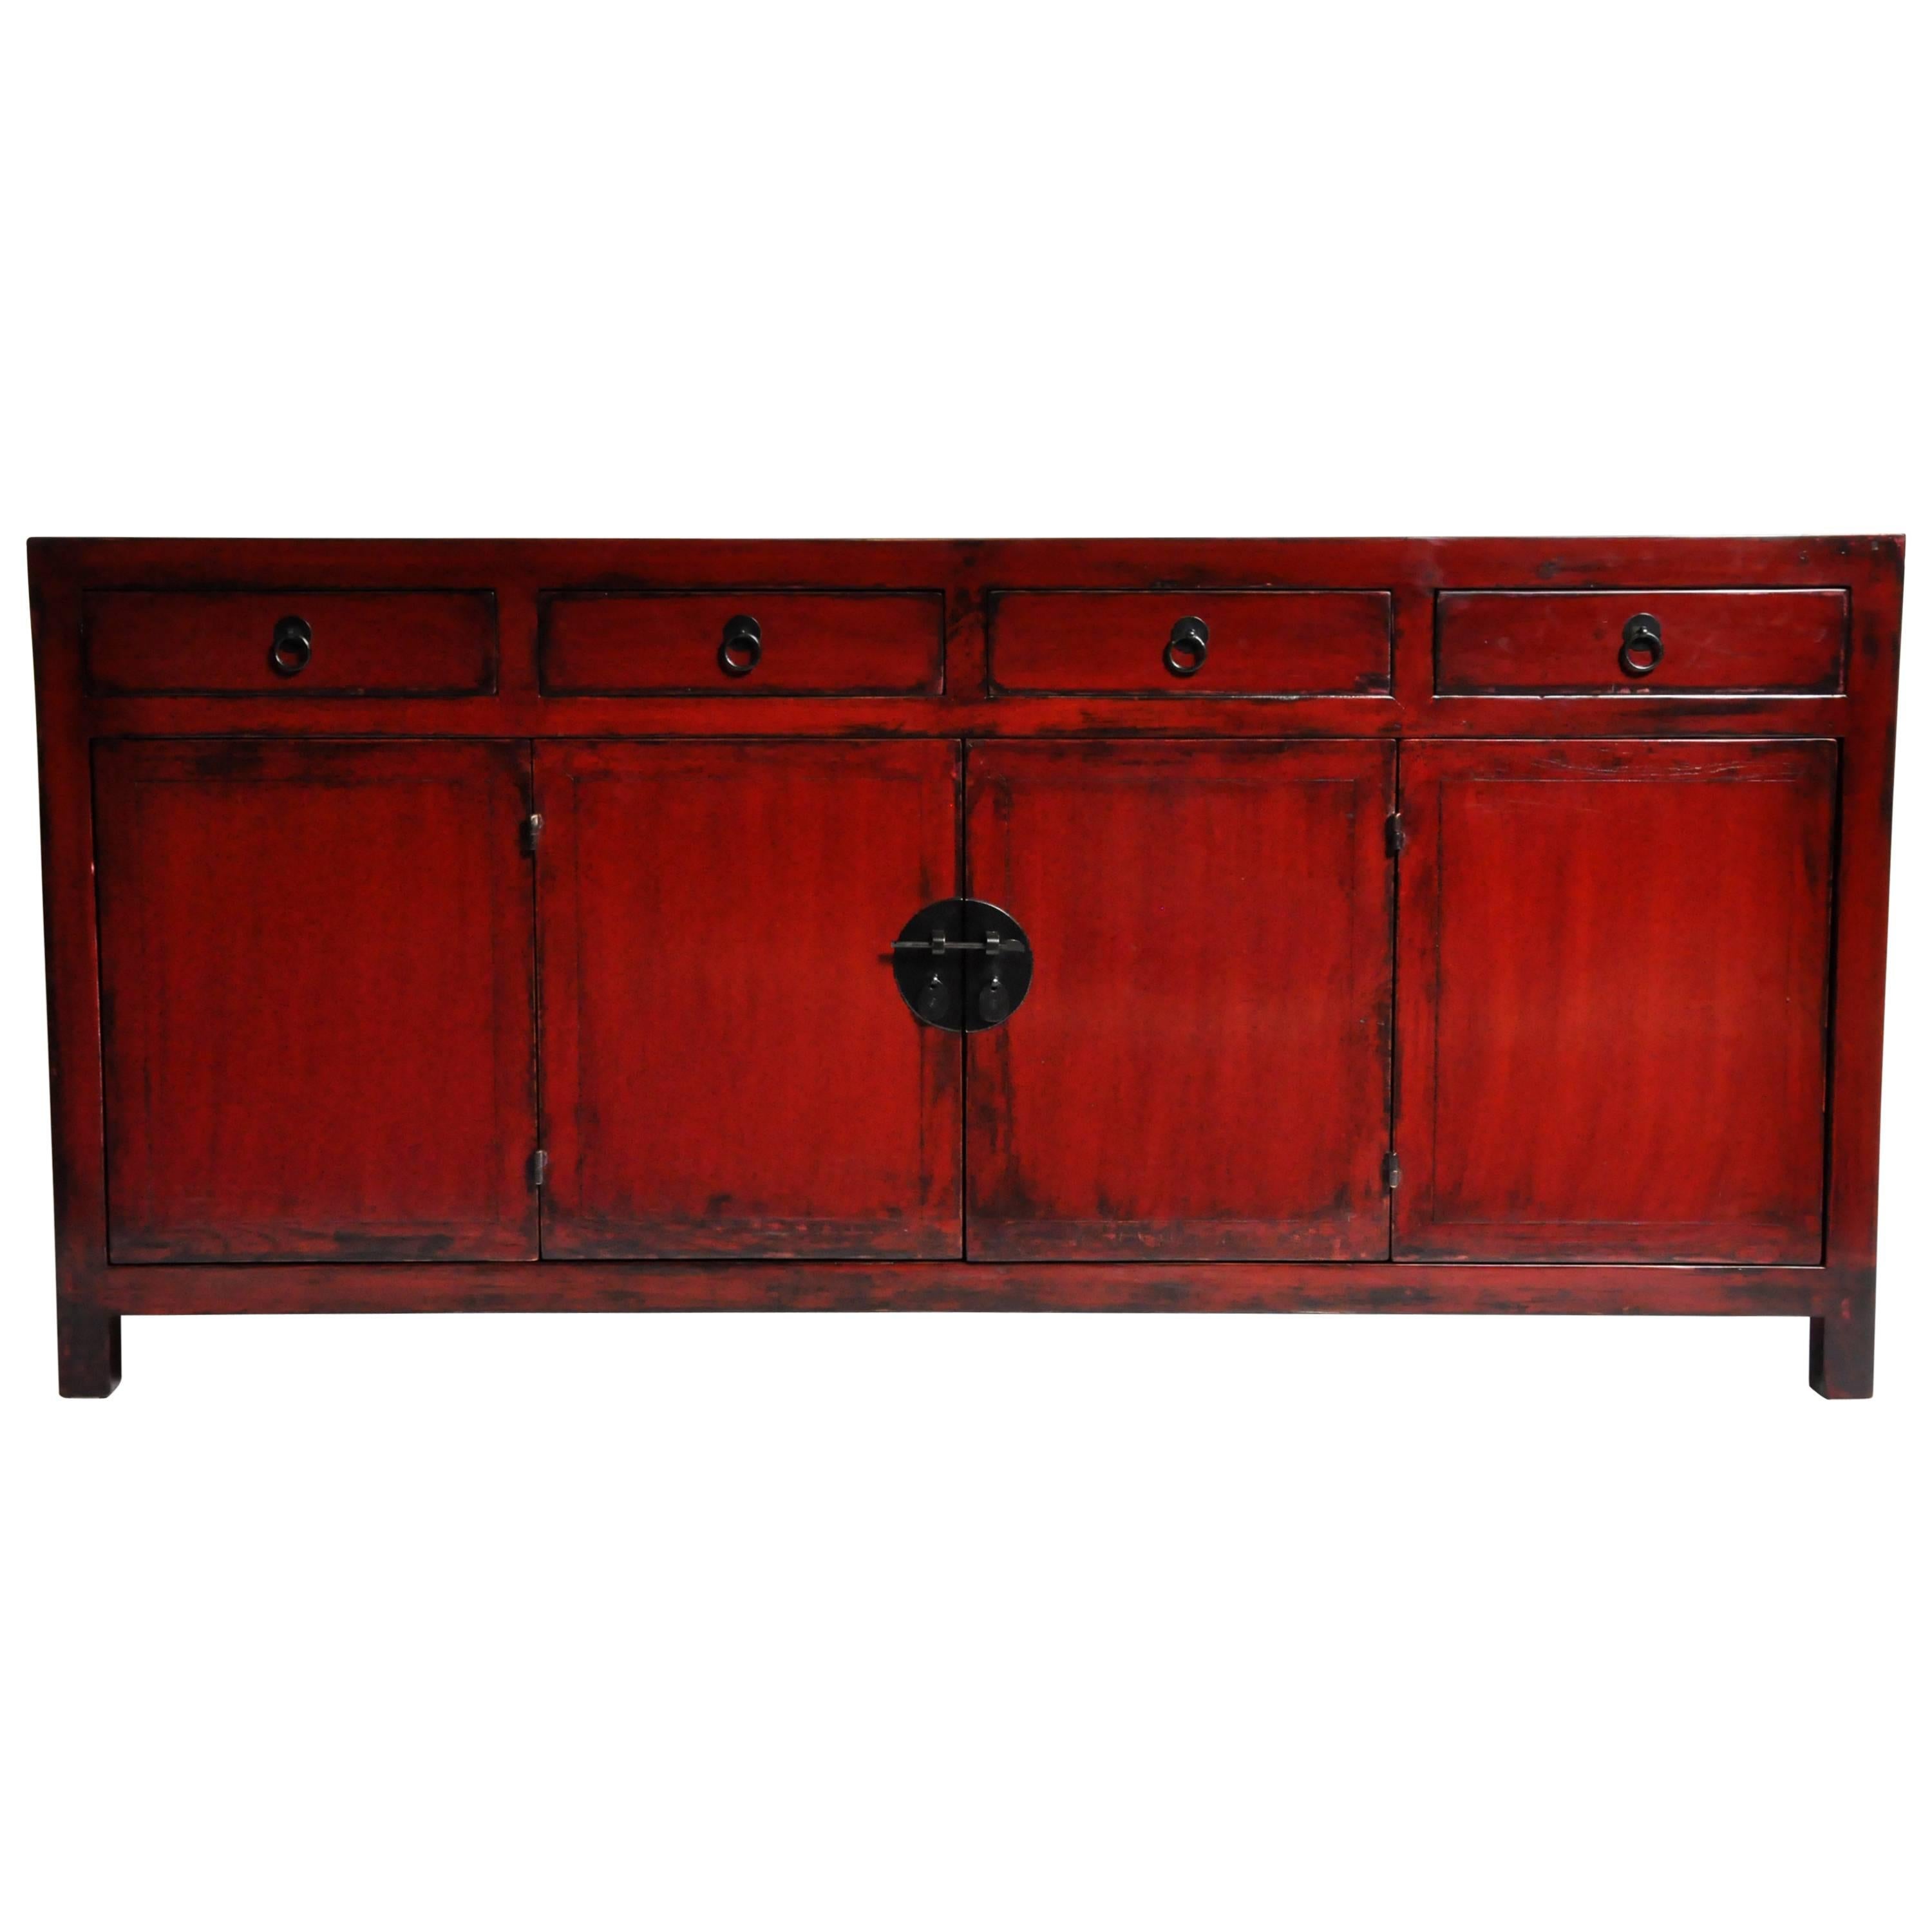 Red Lacquered Chinese Sideboard with Four Drawers and Bi-Folding Doors